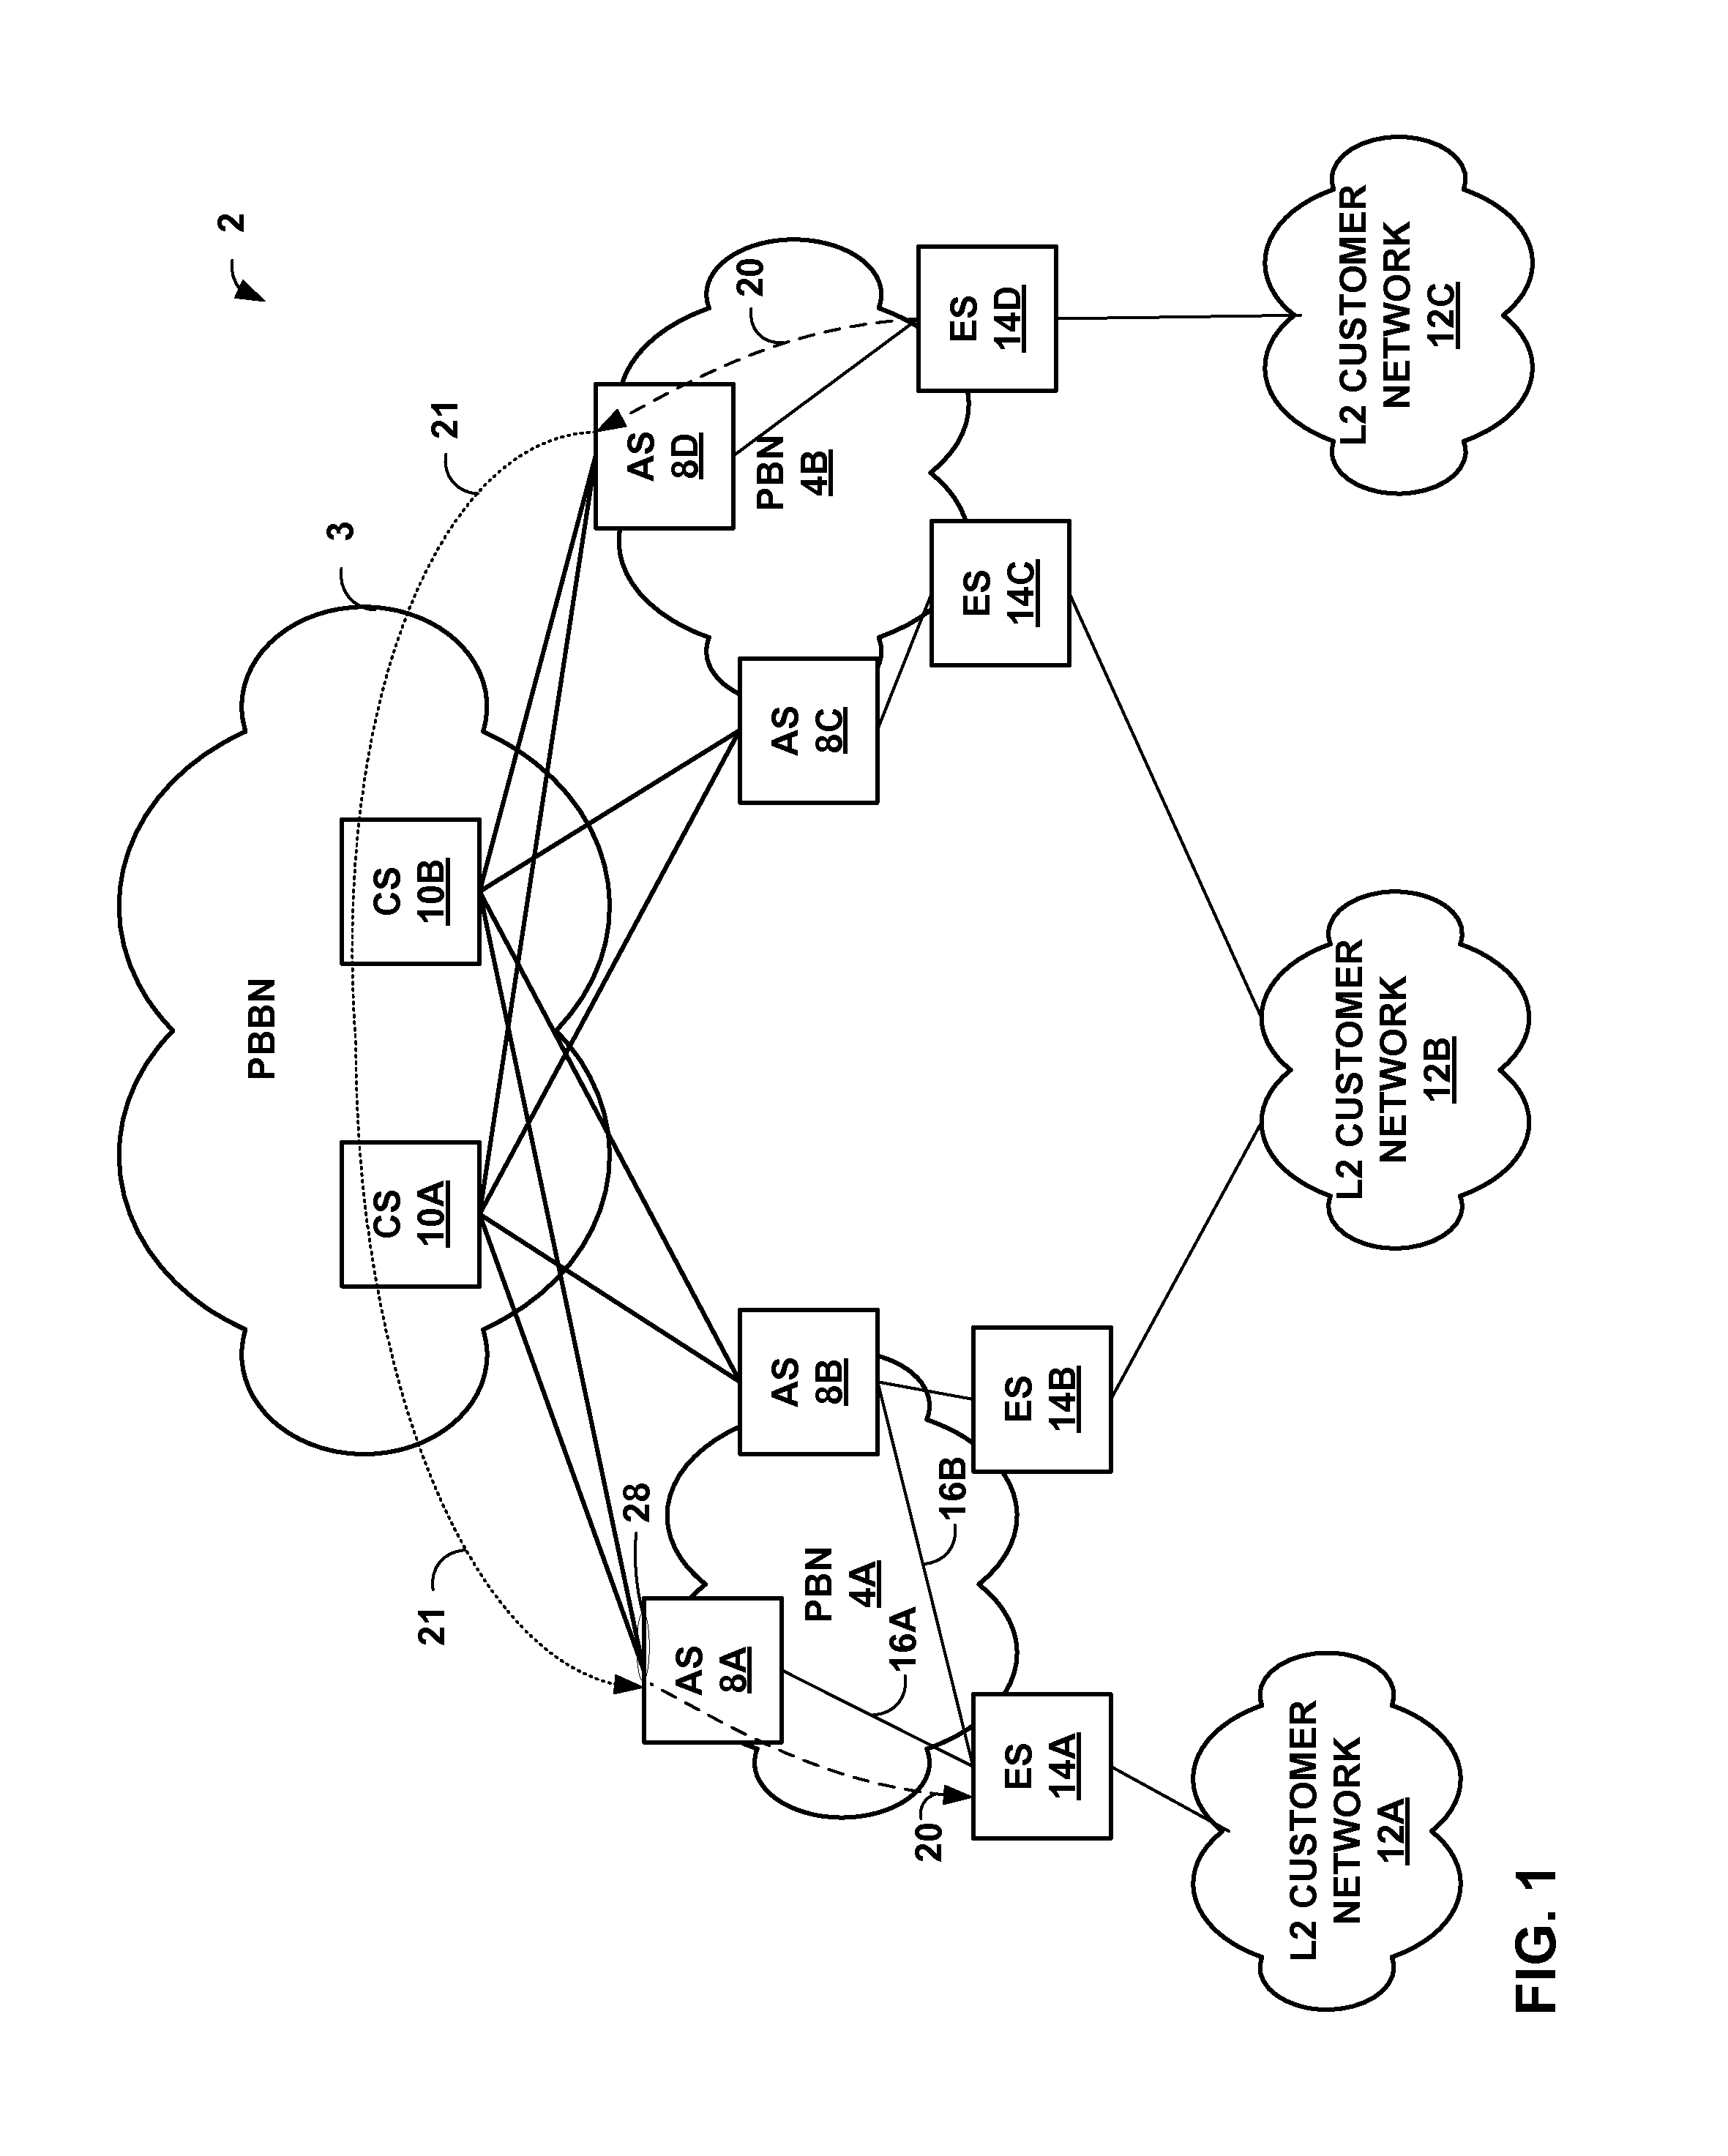 Address learning in a layer two bridging network